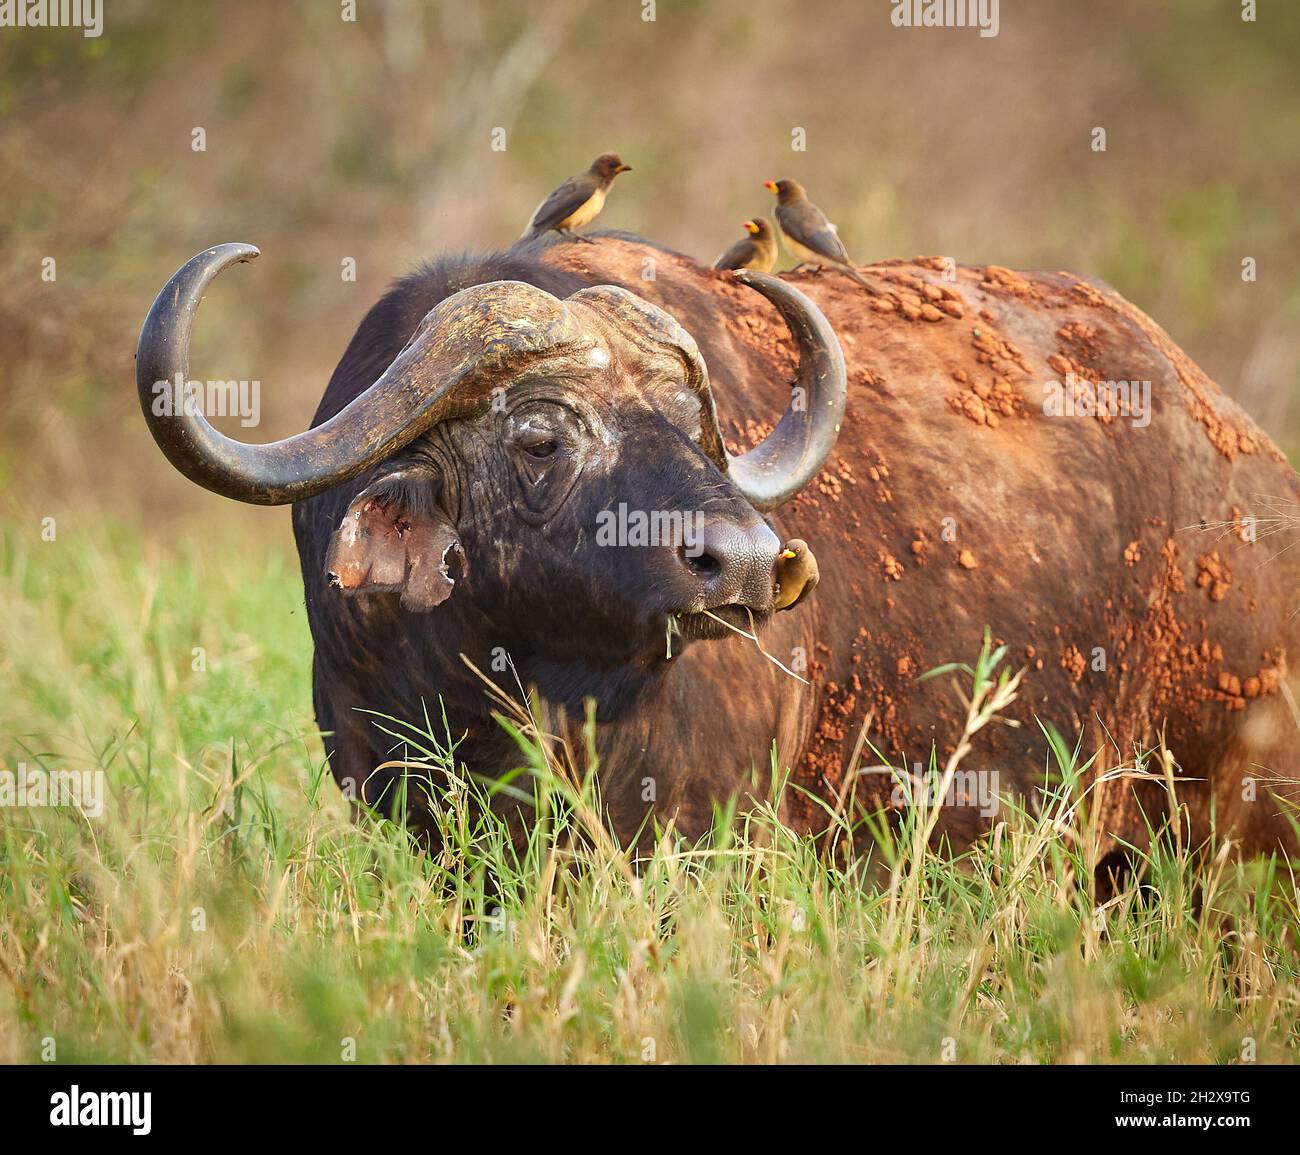 Battered old bull Buffalo B. cincerus with attendant cleaning squad of Oxpecker birds one removing ticks from his nose - Tsavo East Kenya Stock Photo